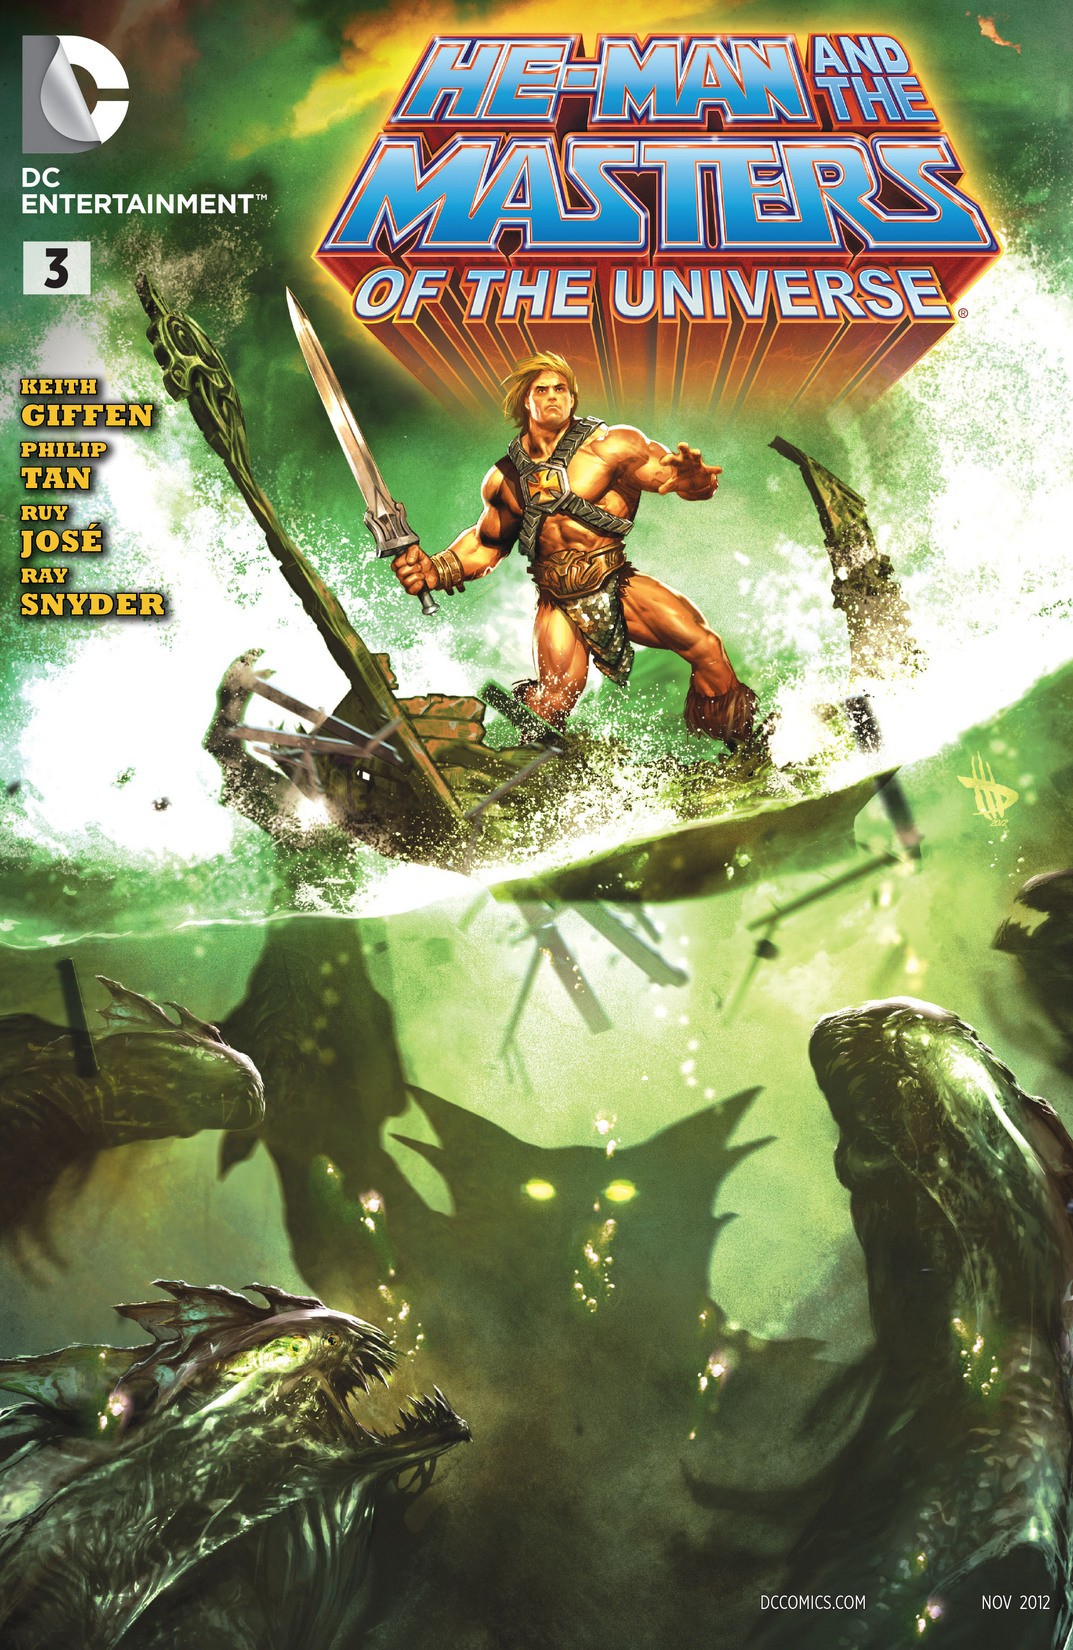 He-Man and the Masters of the Universe Vol. 1 #3